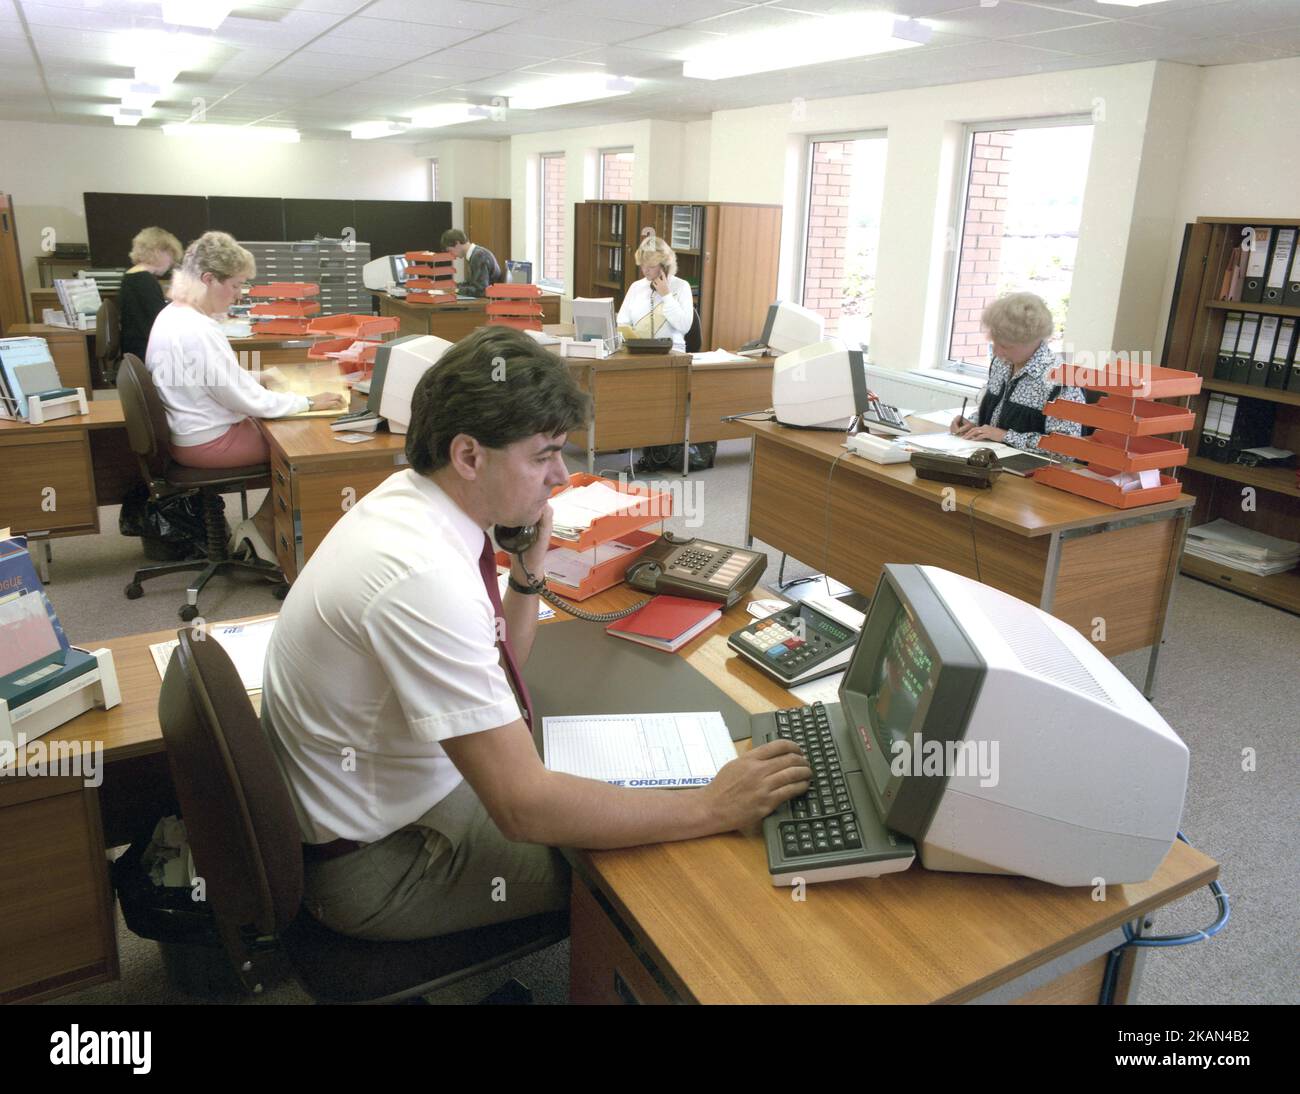 1989, historical, open plan office, male & female employees working at desks, some on the telephone, England, UK using computer consoles or PCs of the era. It was in the early 80s, when IBM launched its PC, that the small desktop personal computer market really began. Stock Photo